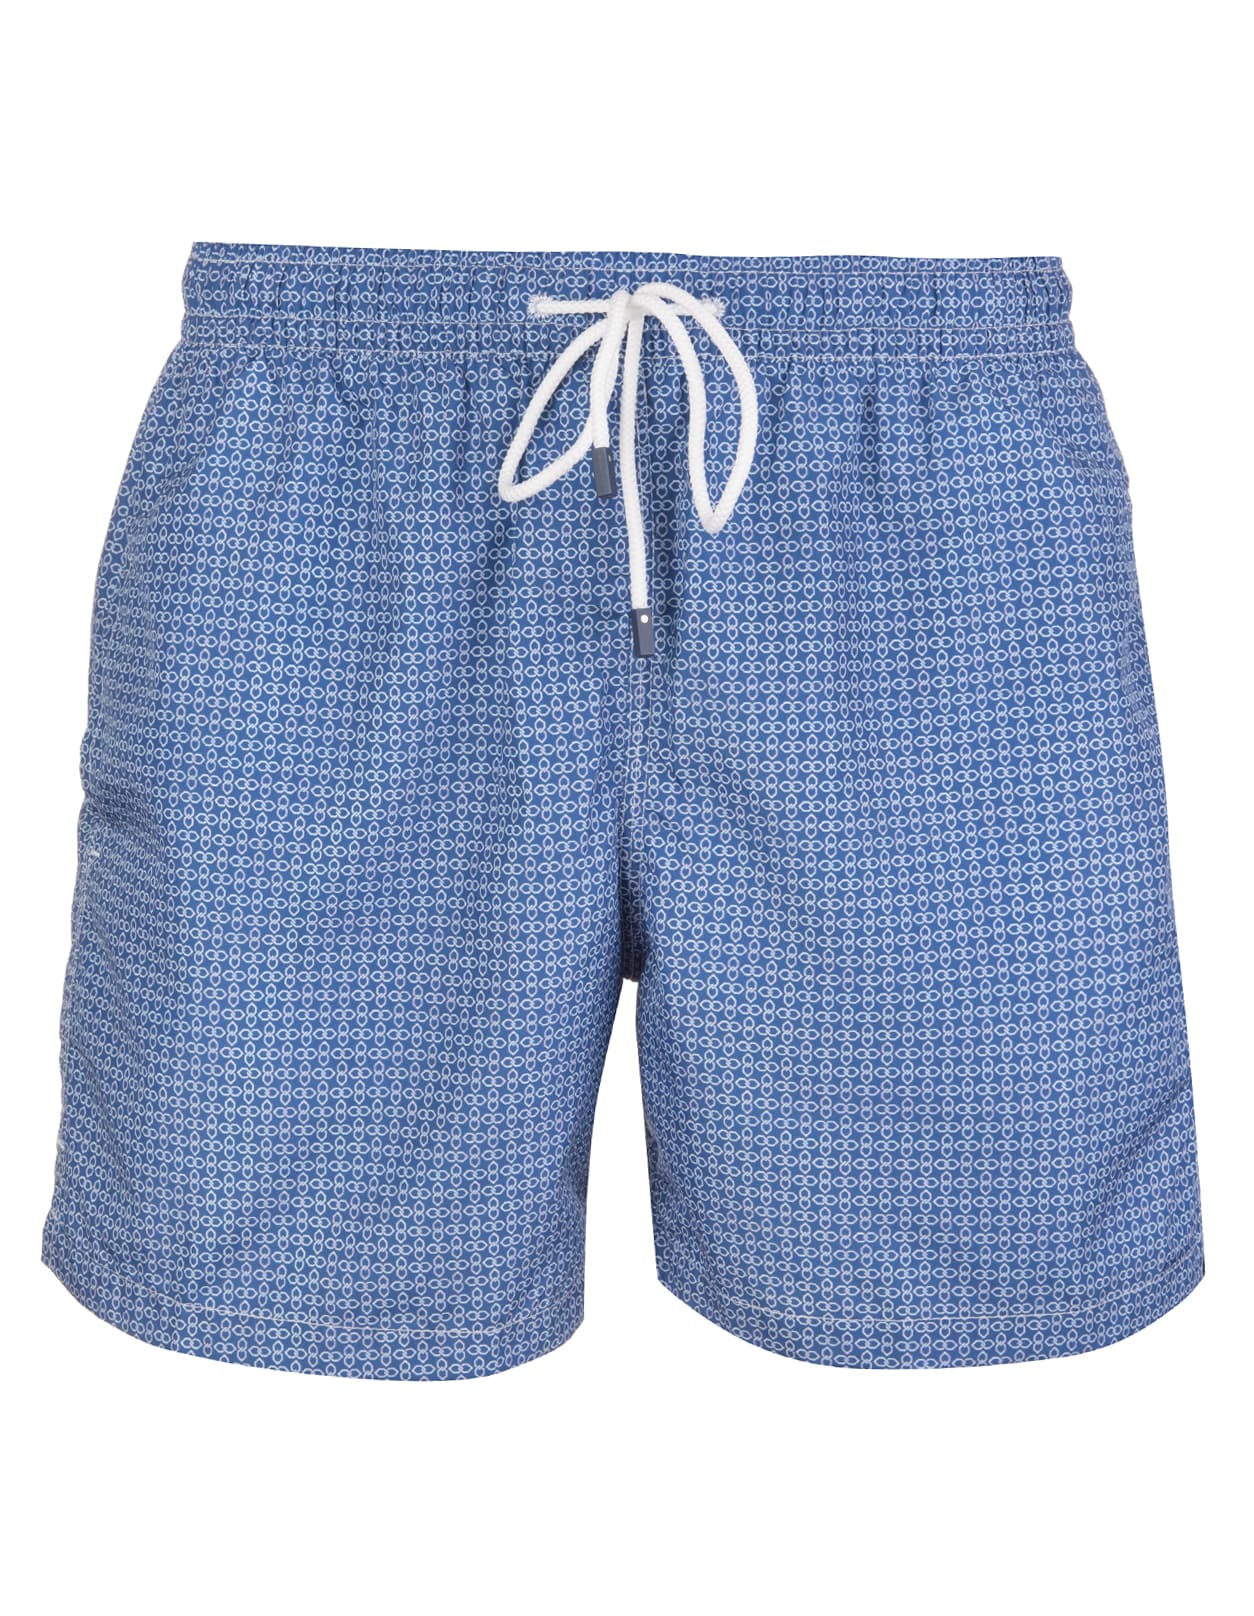 Fedeli Blue Swimming Trunks With White Micro Pattern